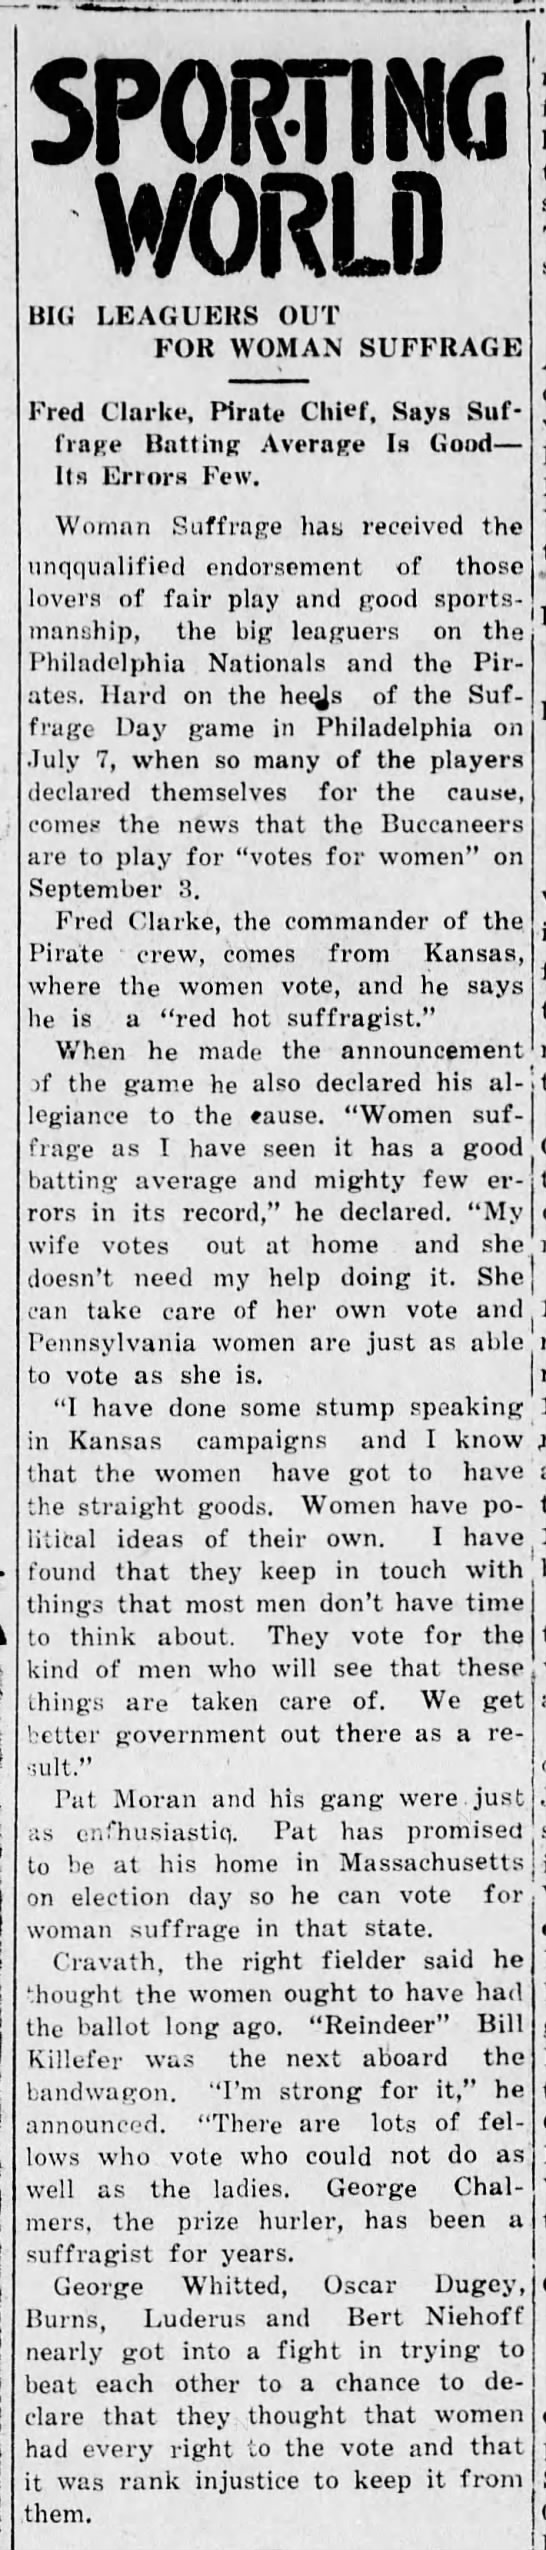 Philadelphia Nationals and Pittsburgh Pirates baseball teams give support to women's suffrage, 1915 - 